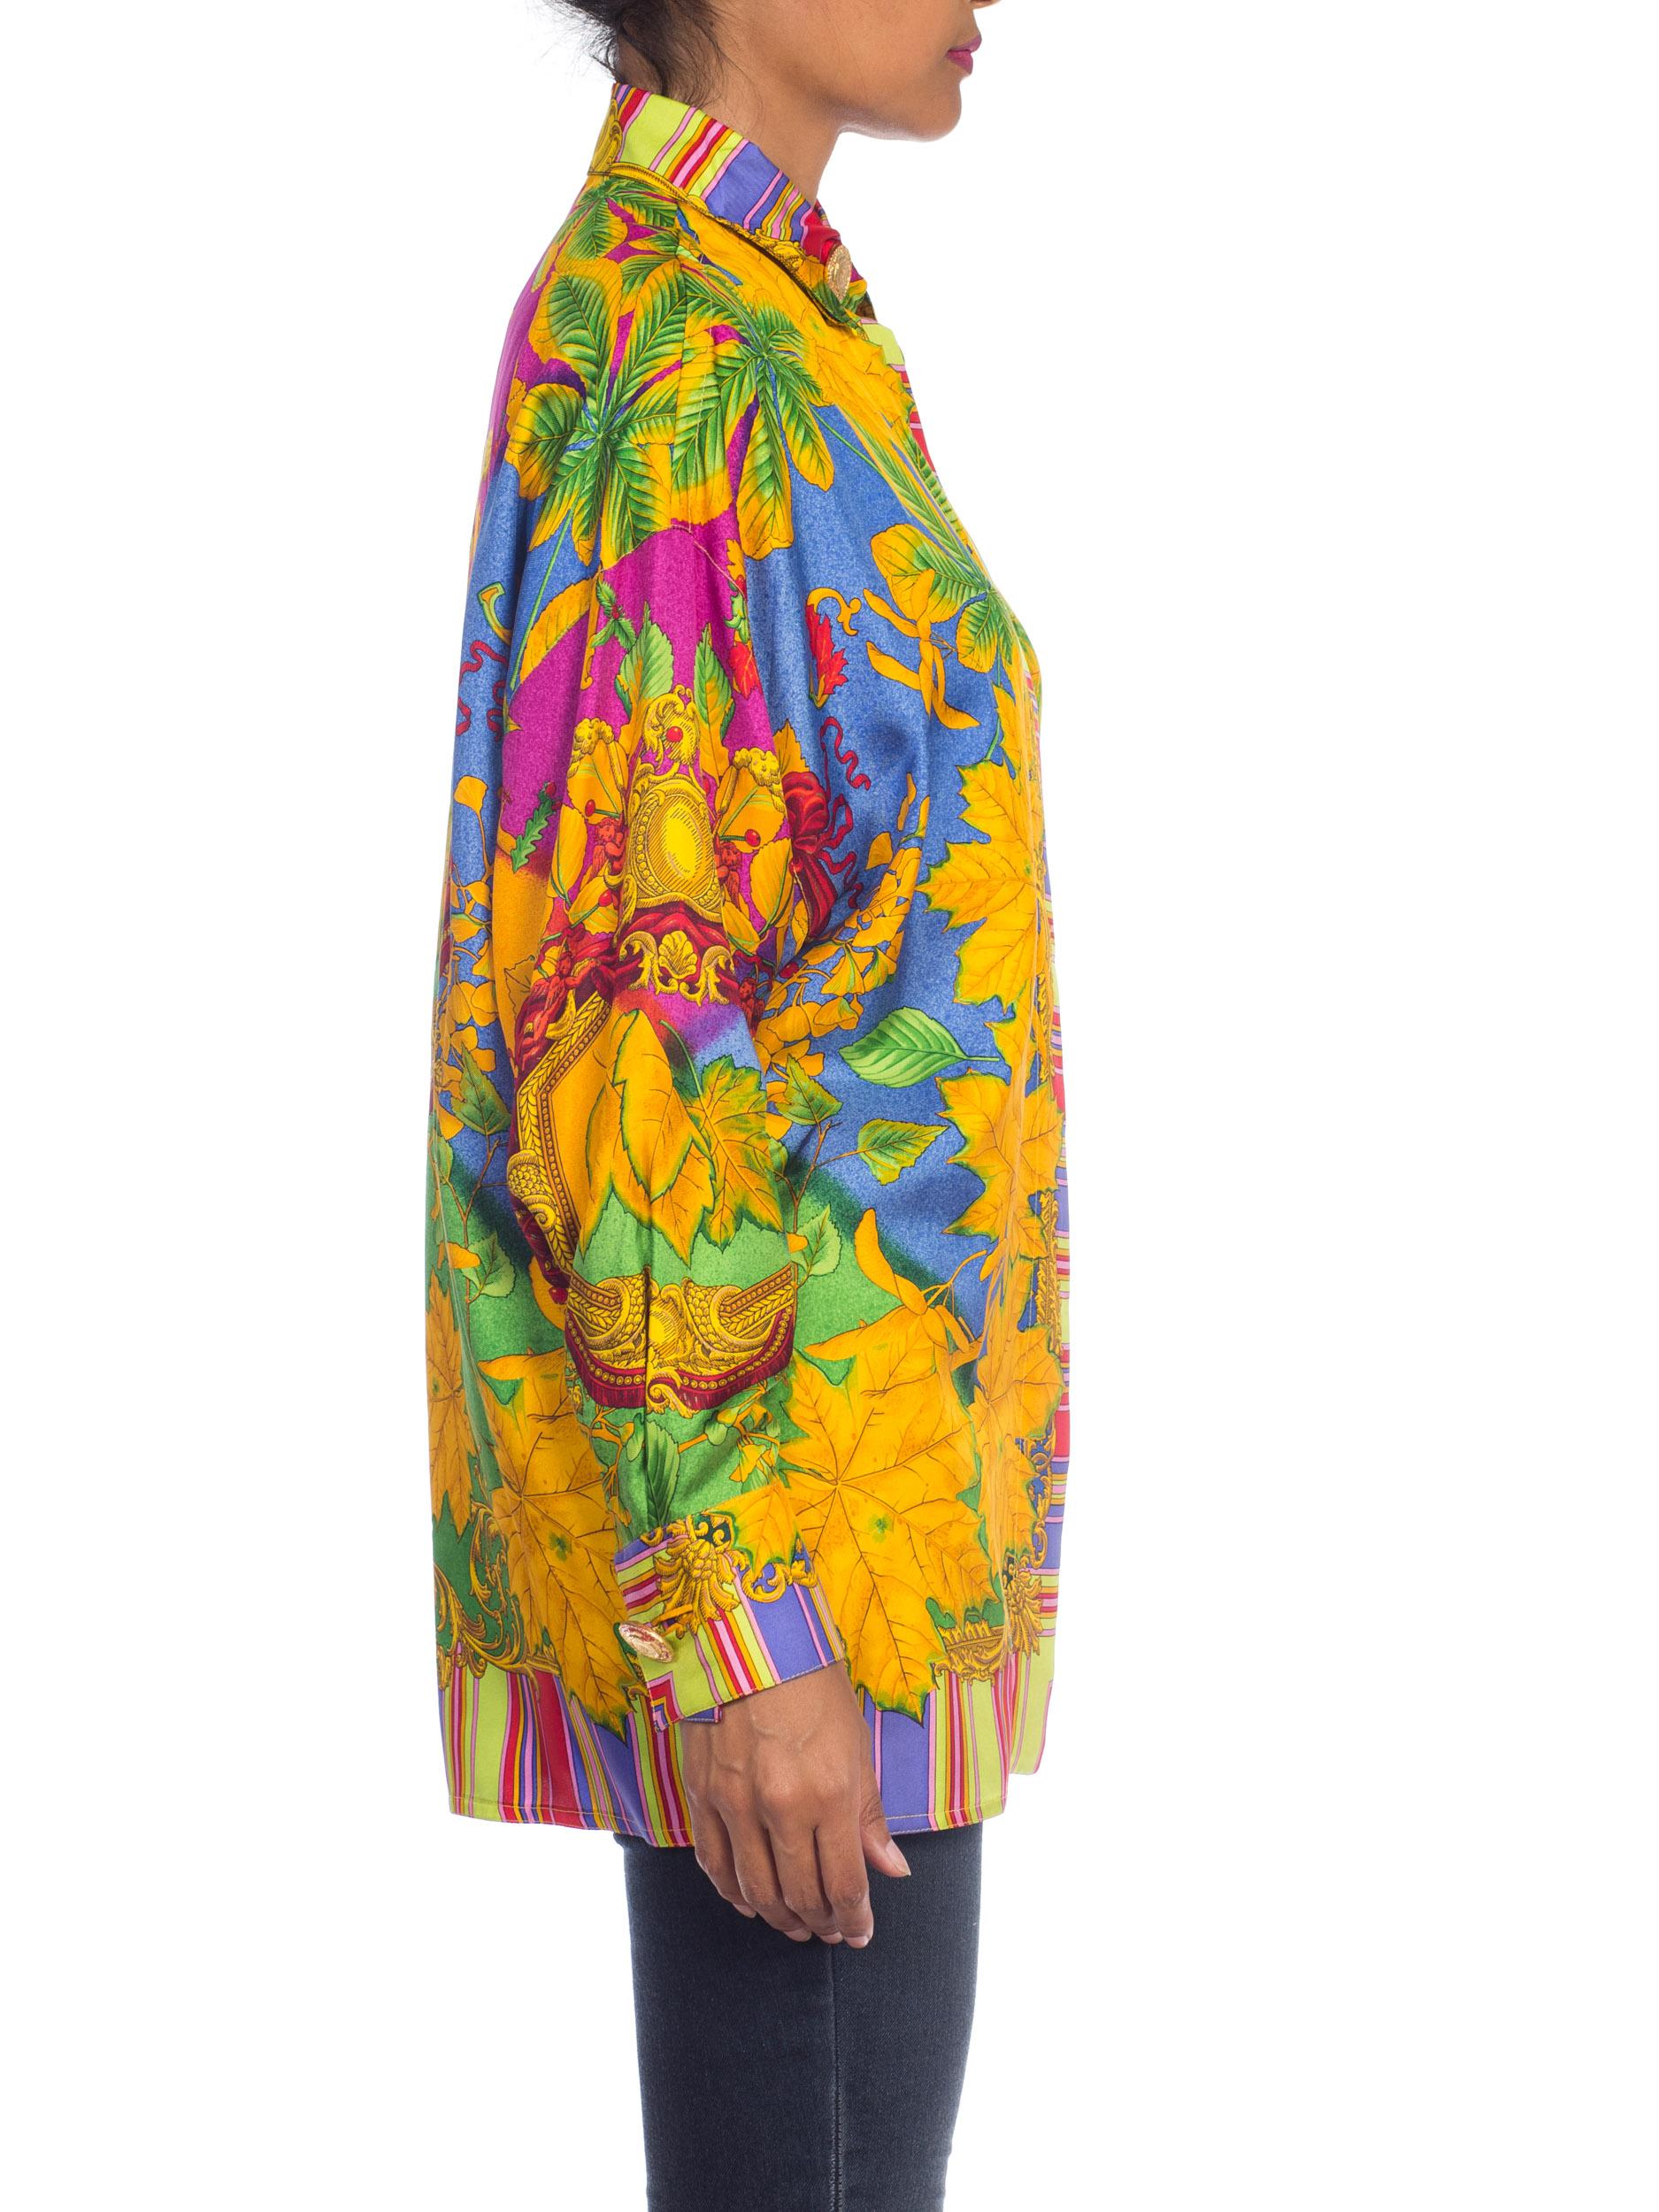 Women's 1990S ATELIER GIANNI VERSACE Printed Silk Baroque Leaves Shirt Sz 38 For Sale